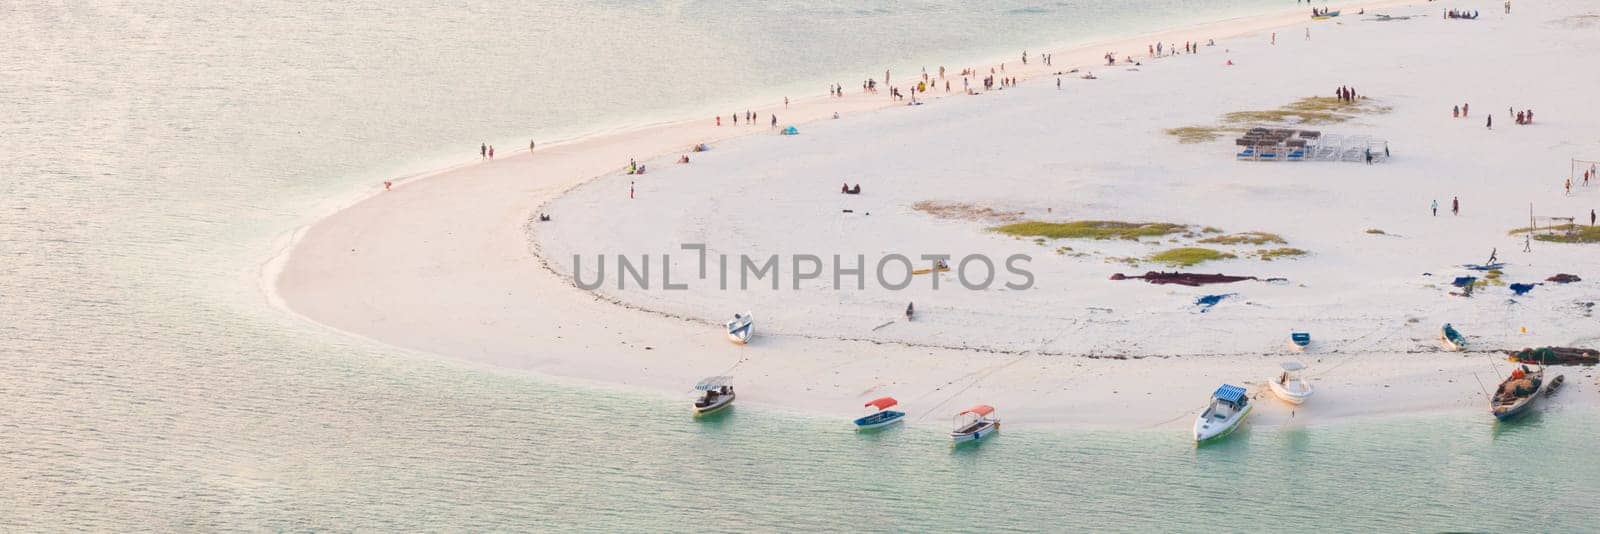 Zanzibar beach with a lot of people and a boat in the water by Robertobinetti70